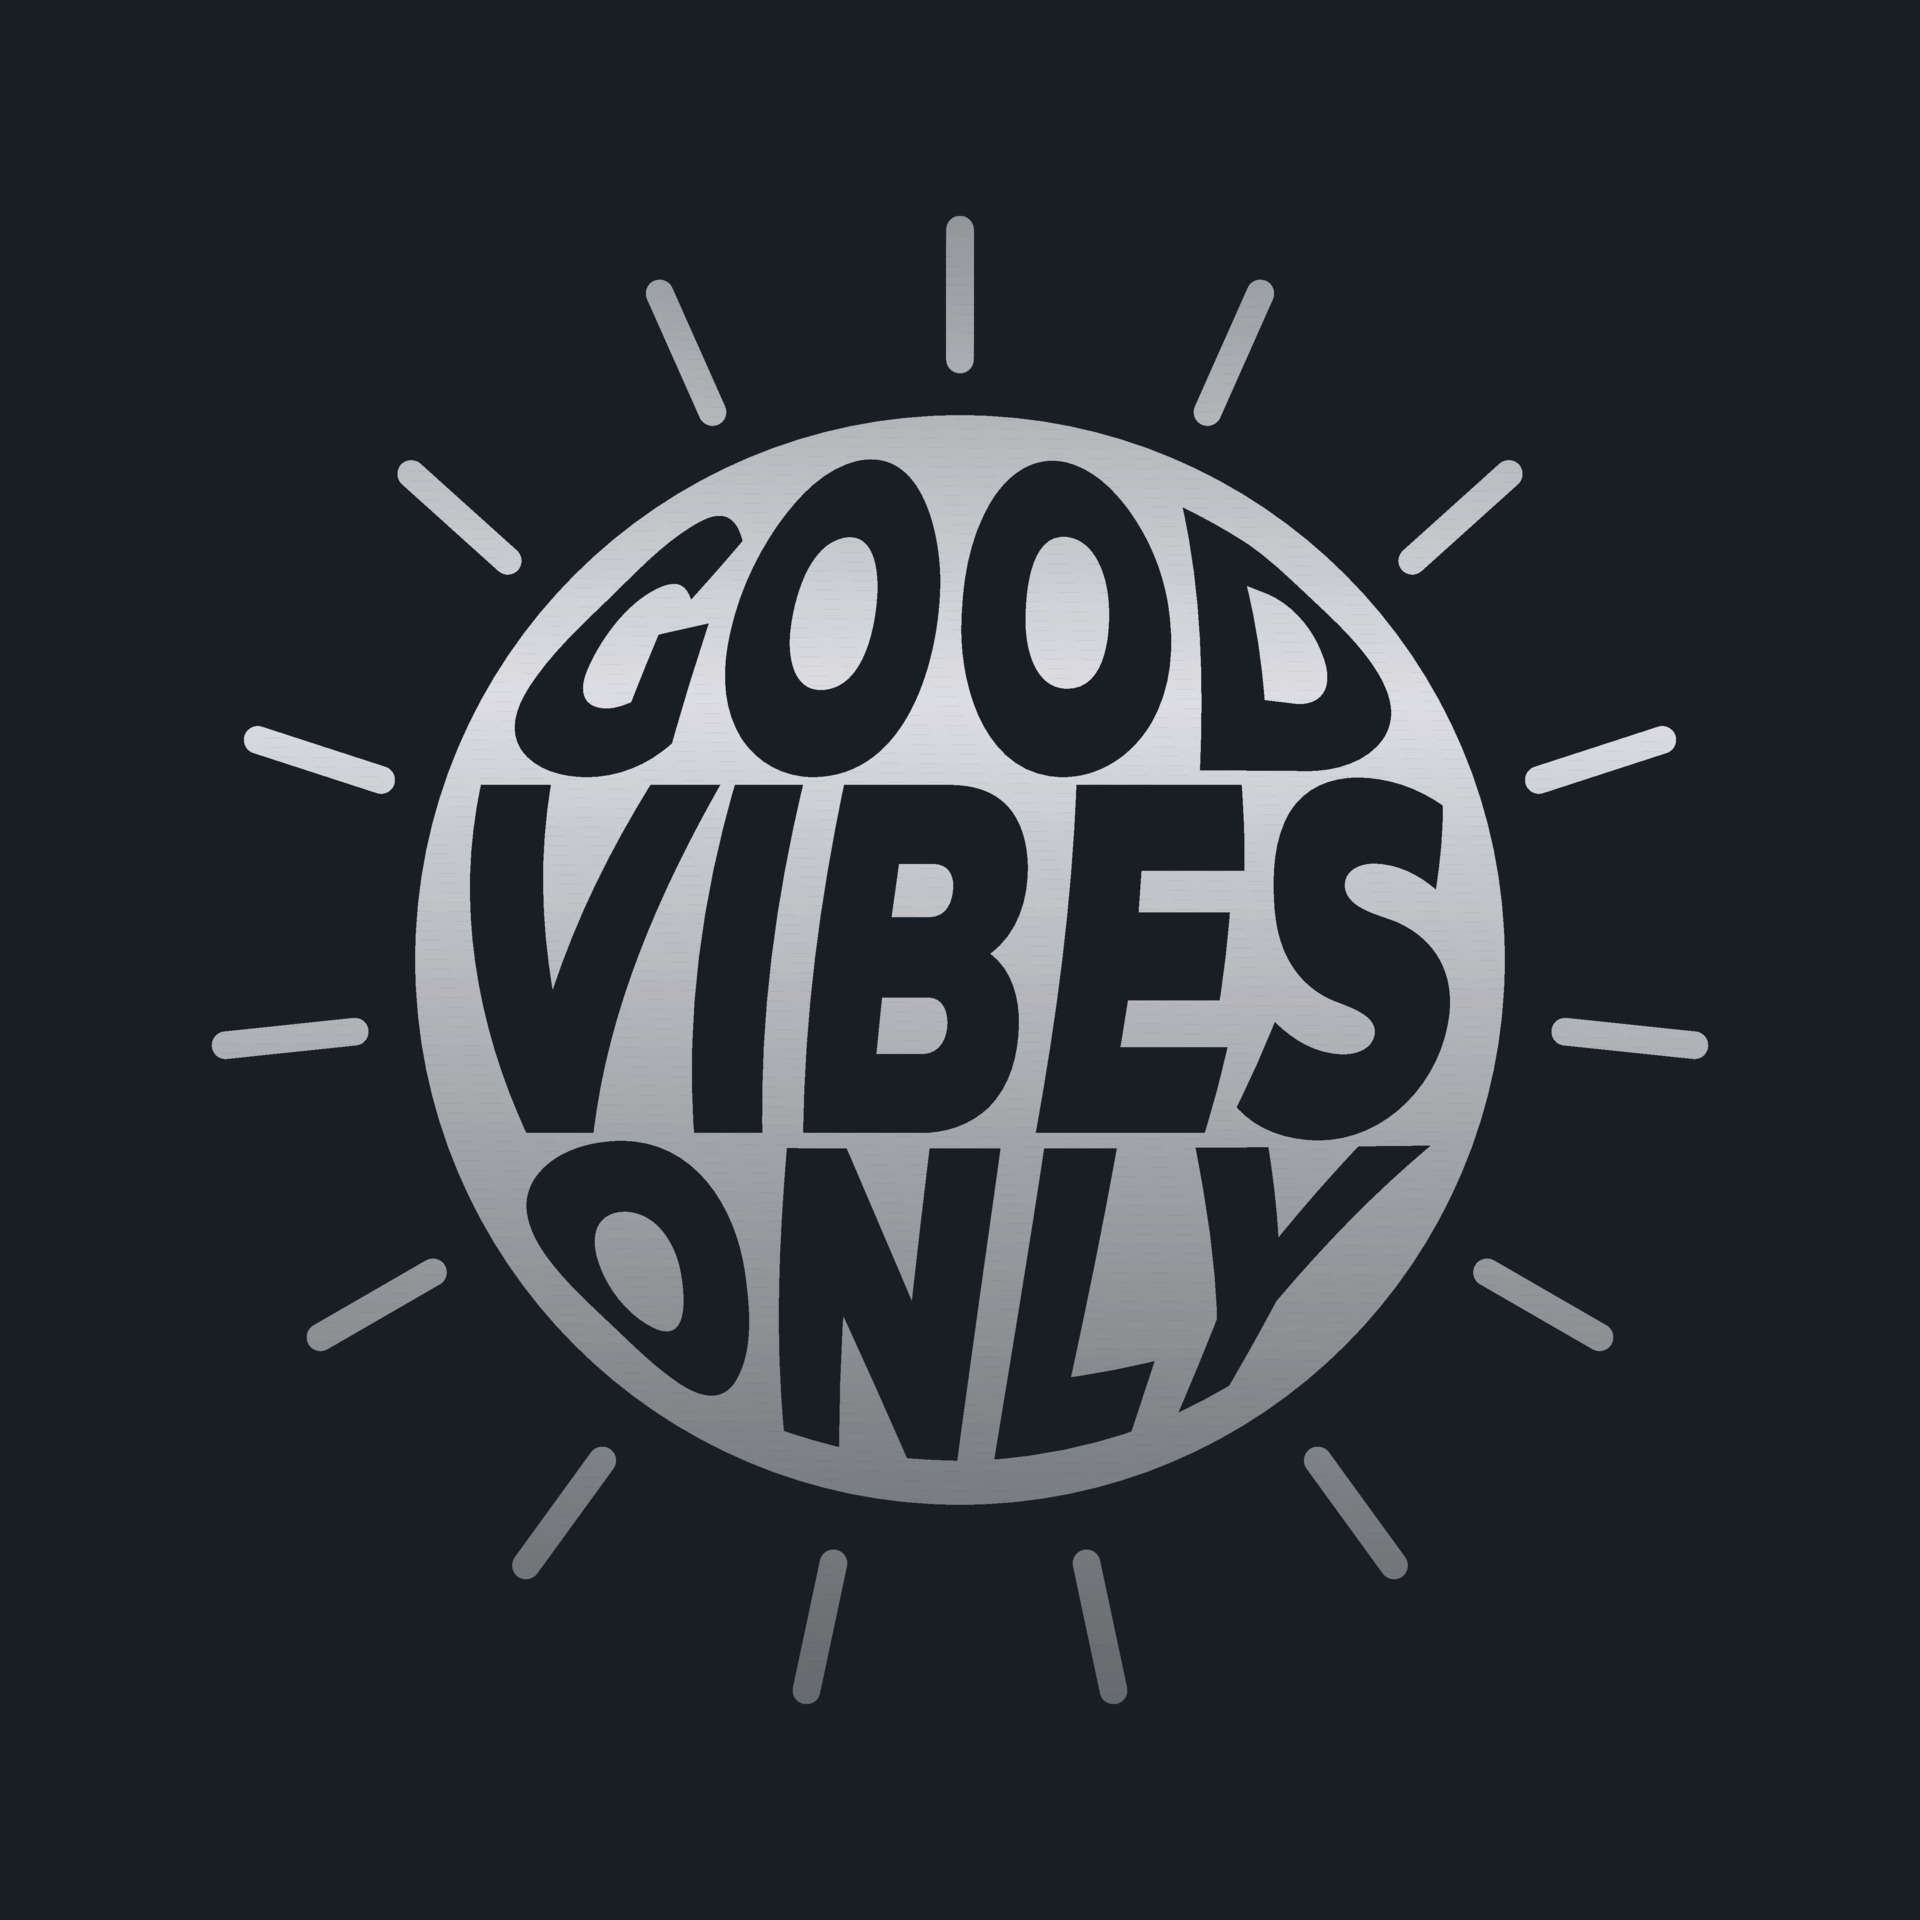 GOOD VIBES ONLY, lettering typography design artwork. 22028212 Vector ...